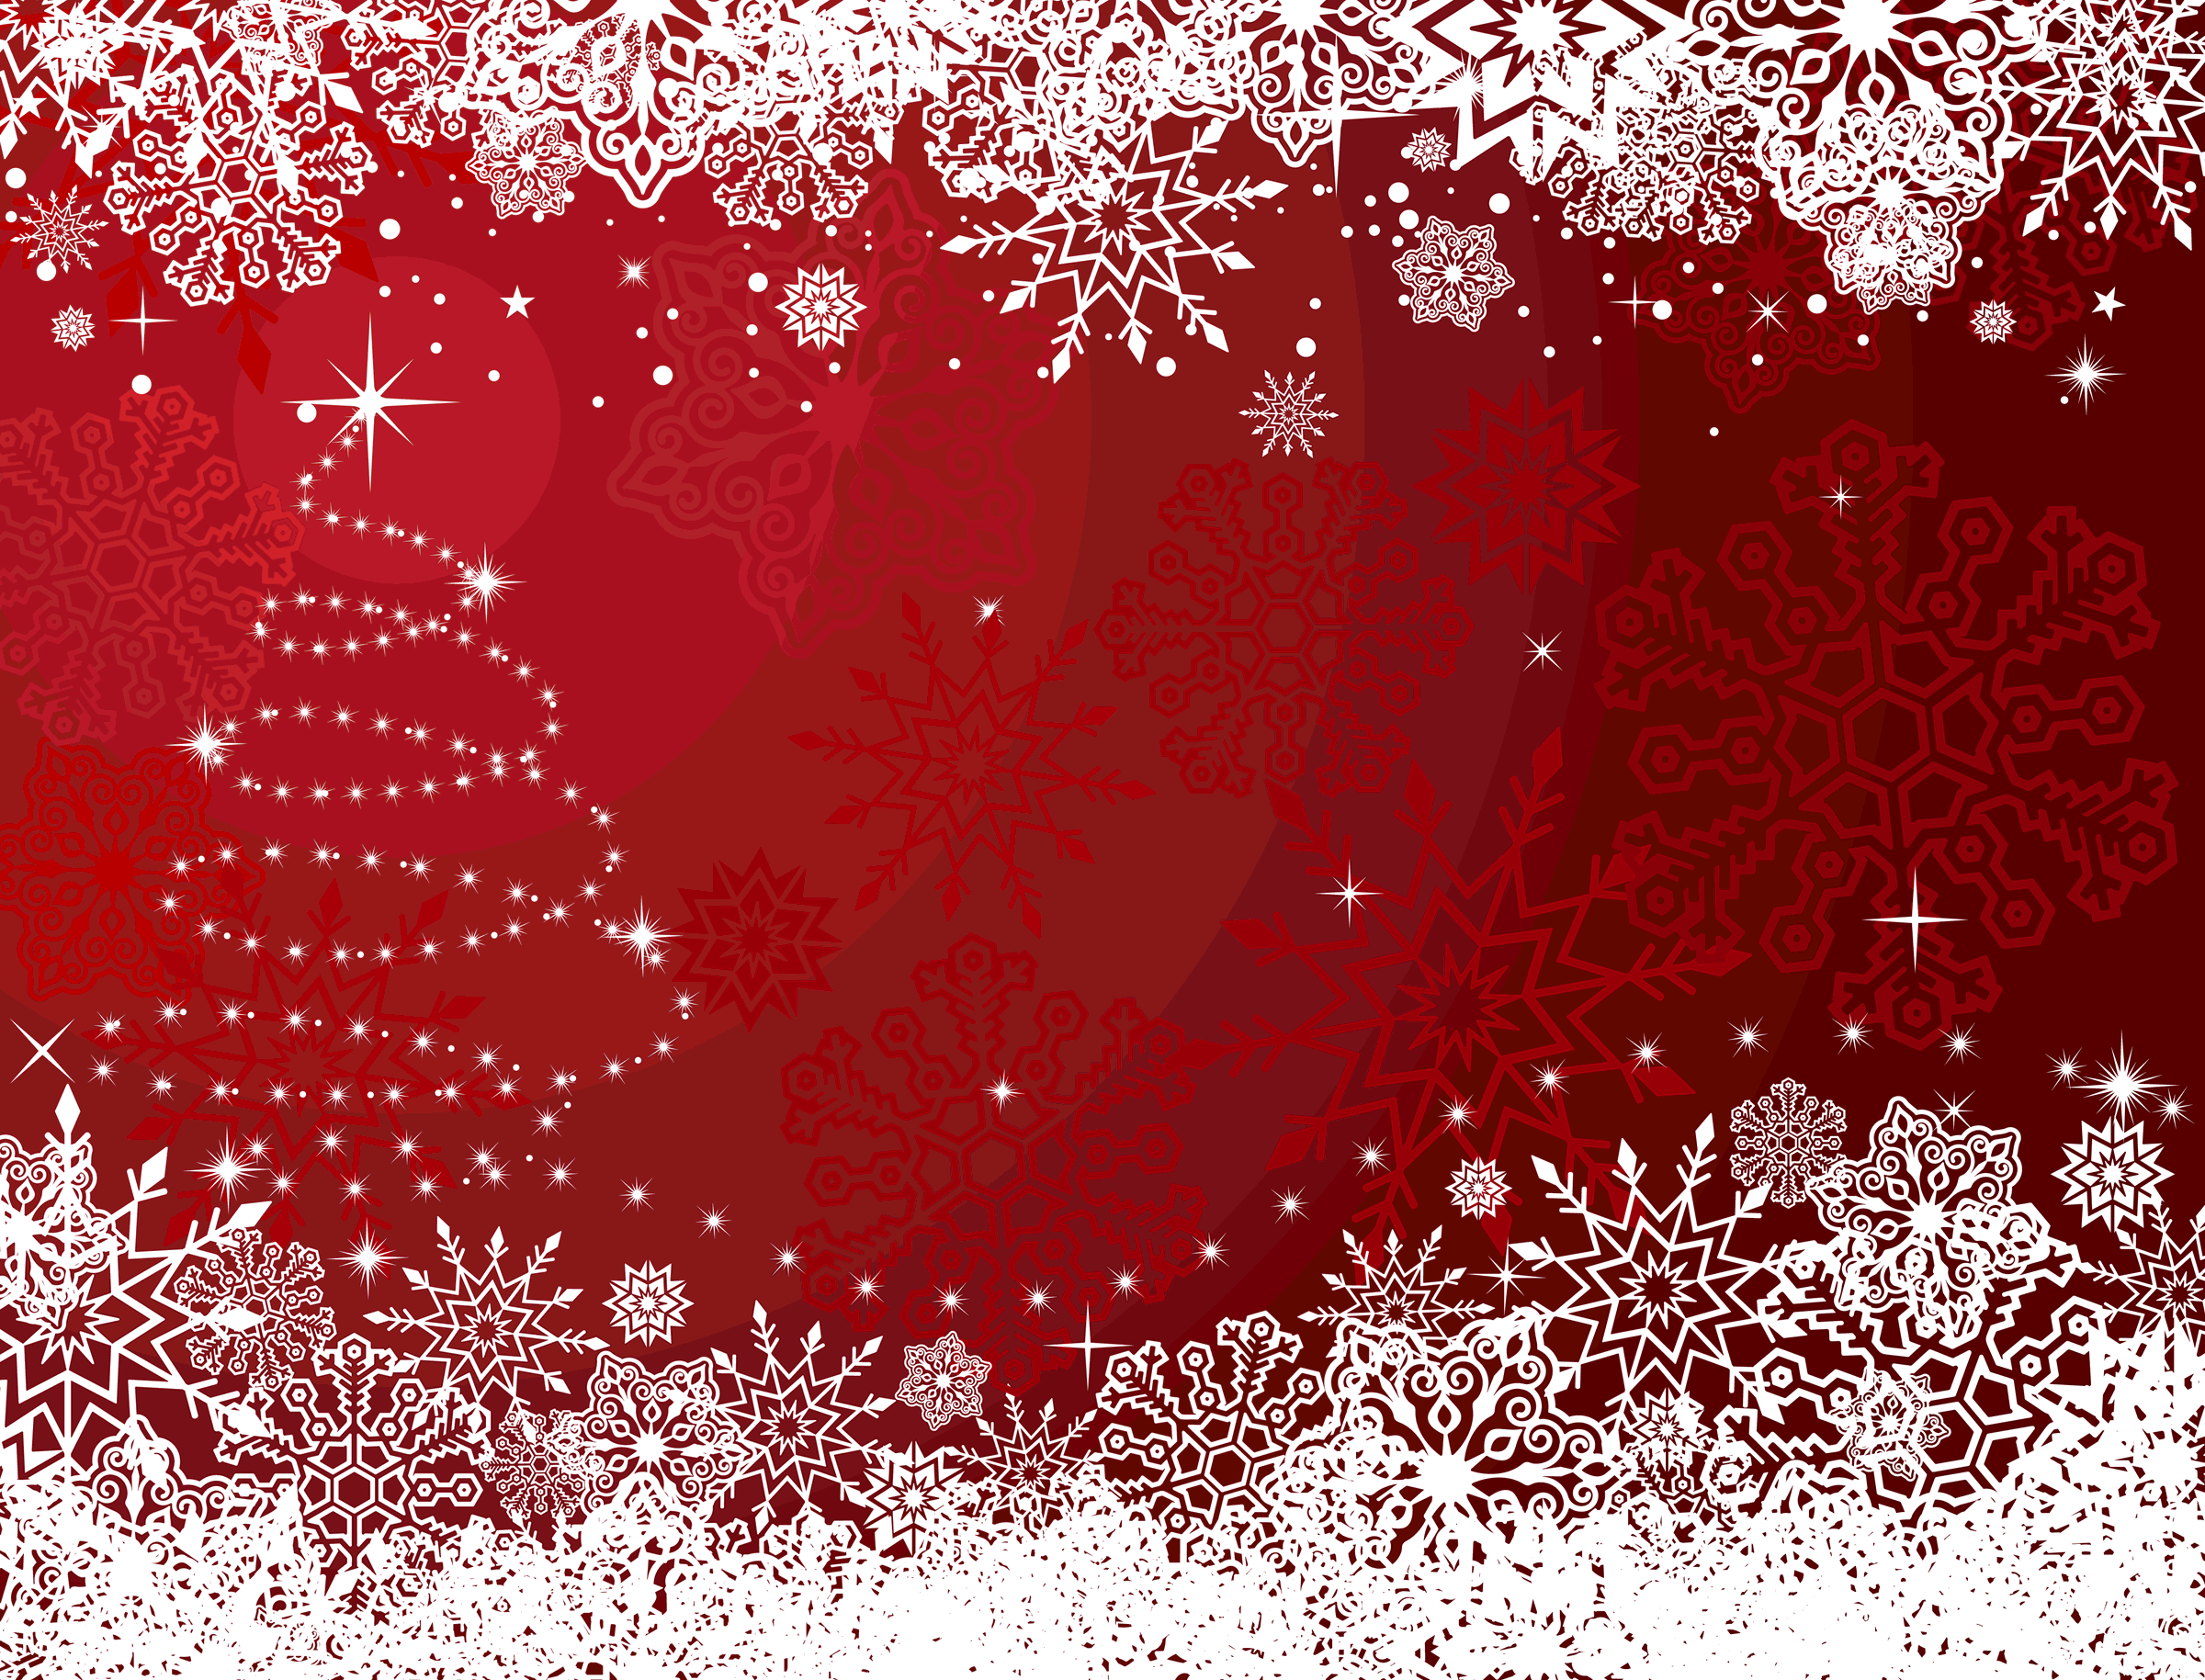 Christmas Backgrounds Picture - Wallpaper Cave Animated Christmas Powerpoint Backgrounds